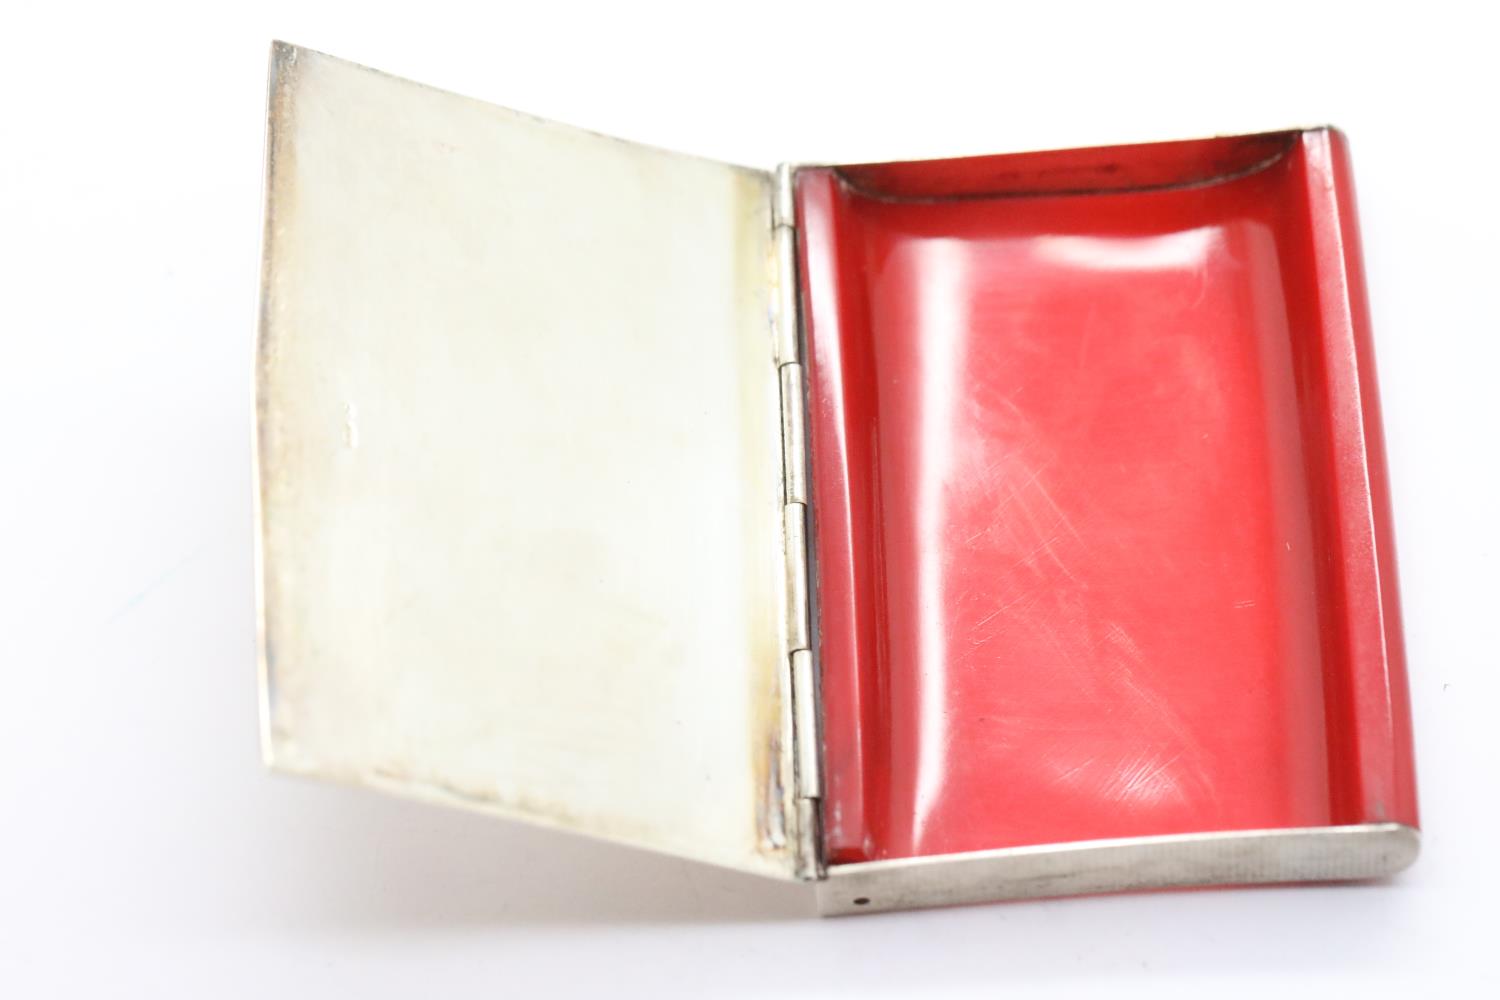 Art Deco 925 silver and red celluloid card case, import marks for 1928. P&P Group 1 (£14+VAT for the - Image 2 of 4